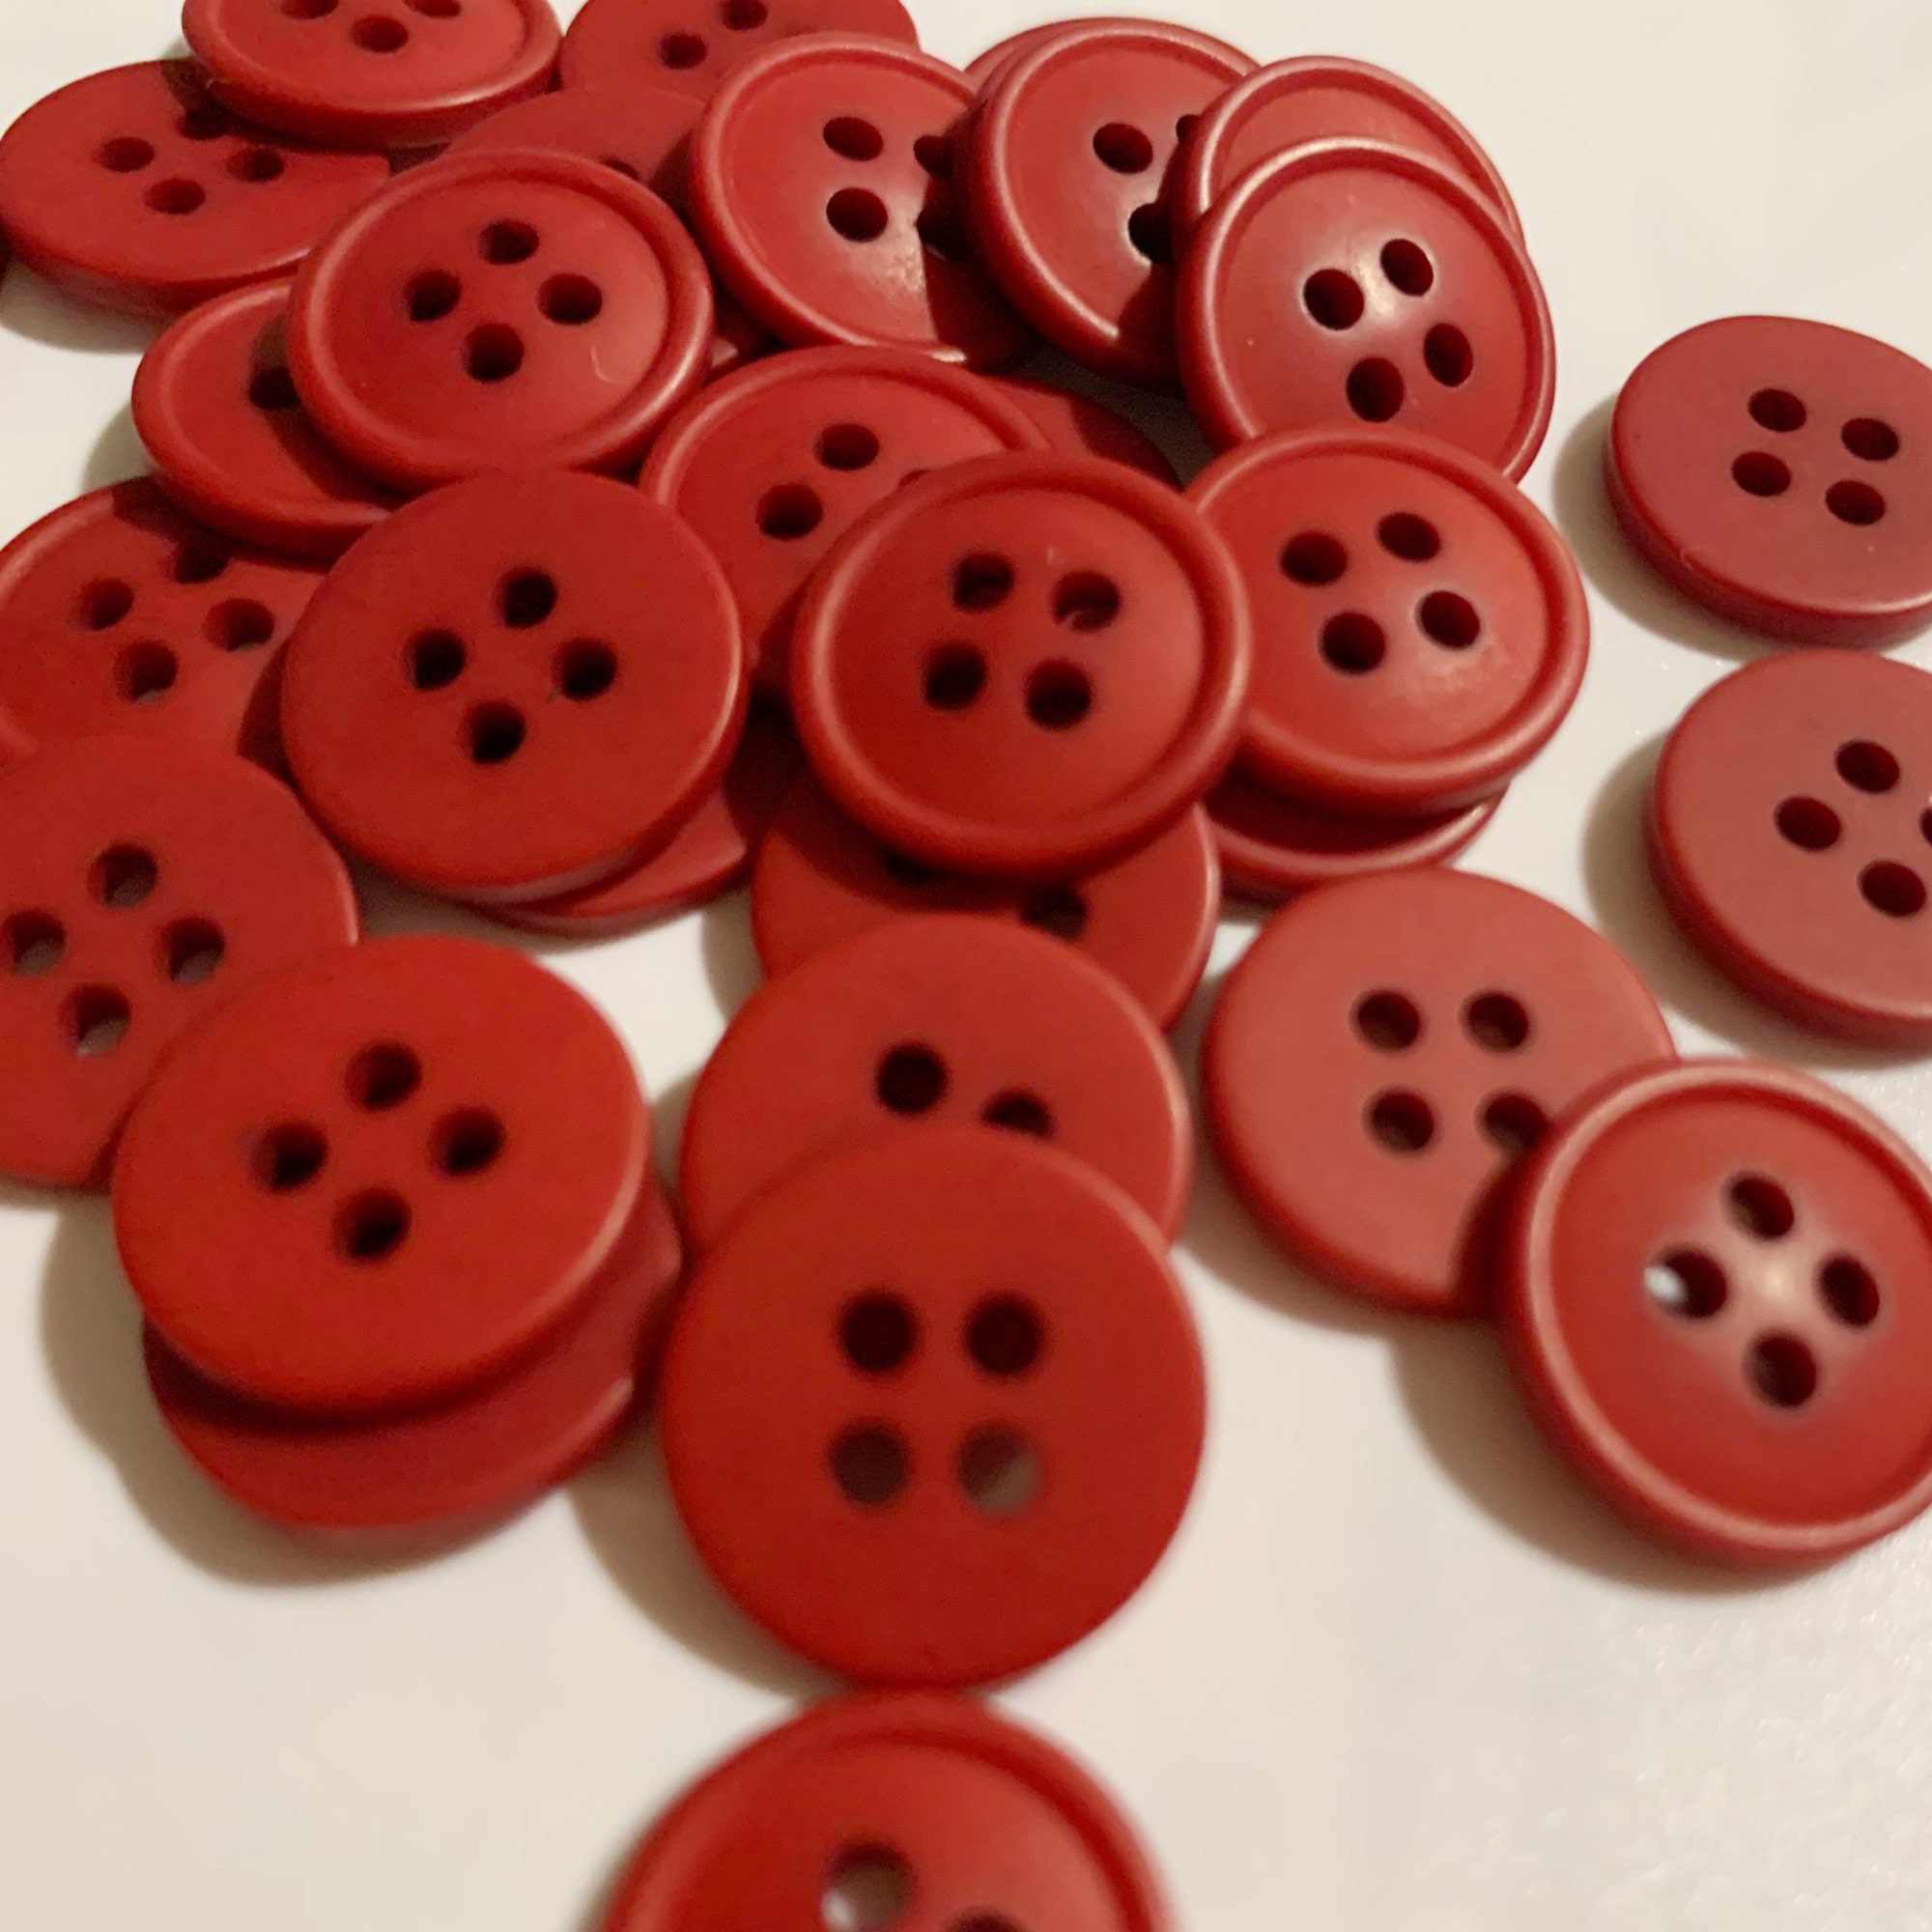 Candy Apple Red Buttons, 4 Hole Sewing/Crafts Buttons 10mm - 24 Pieces (095)